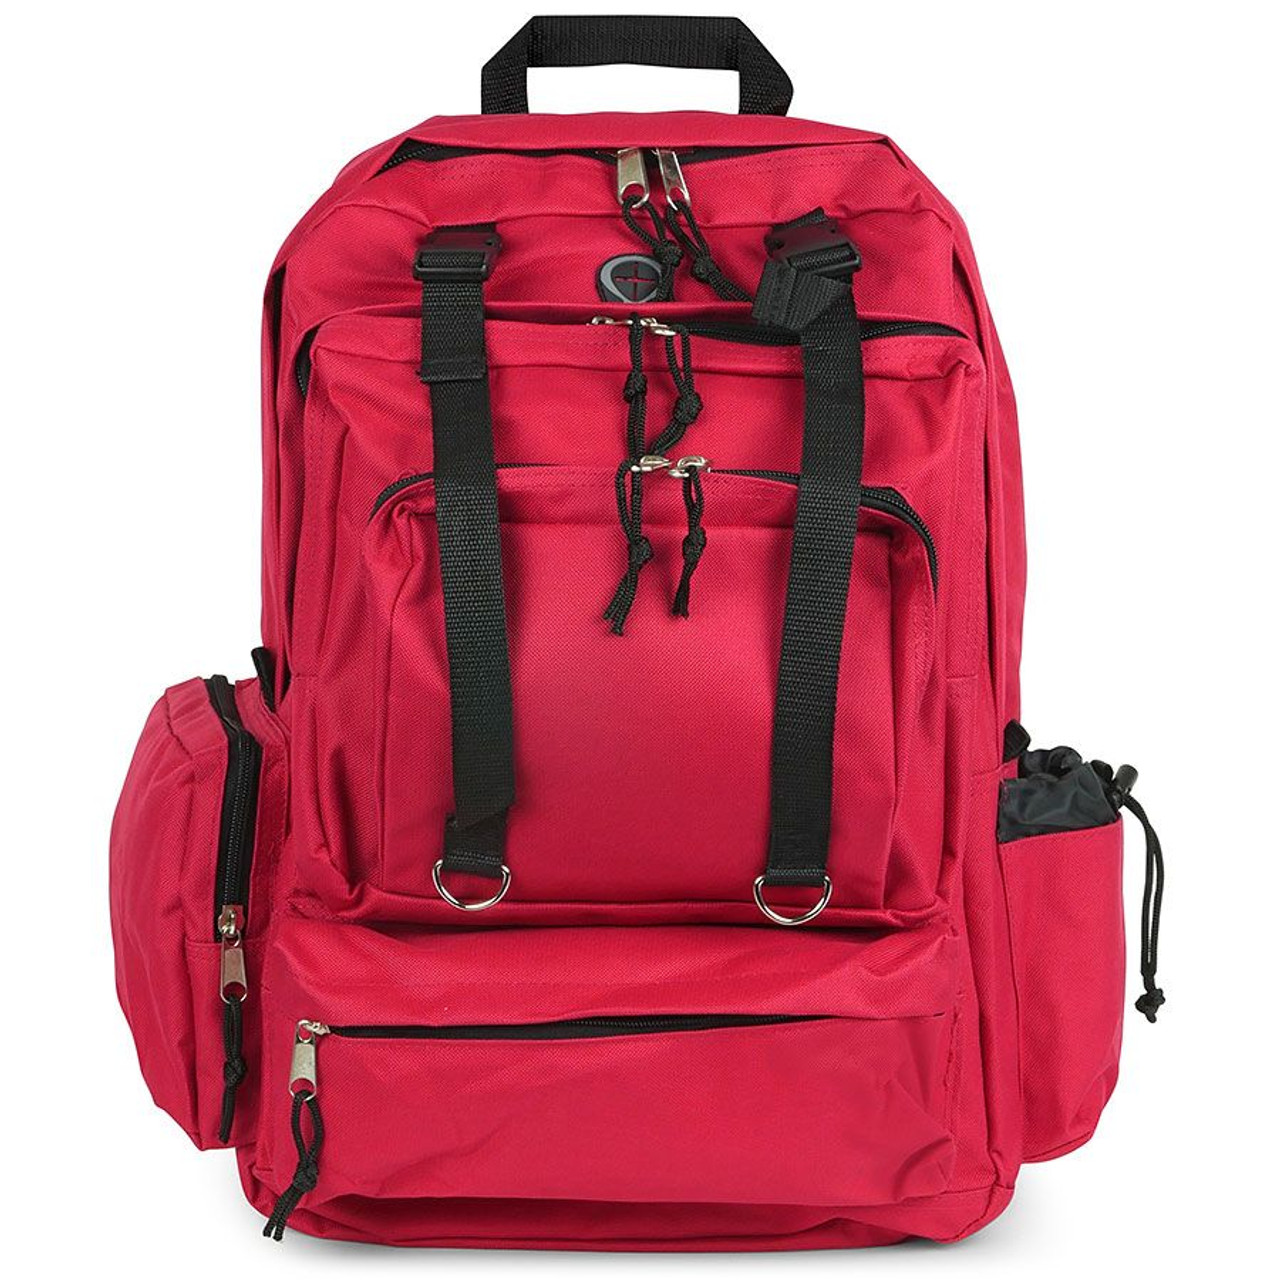 Deluxe Reponder Red Backpack - Emergency Nylon Aid Bag Bags, Medical and Backpacks Survival First Gear Kit - Response - EMT - Containers